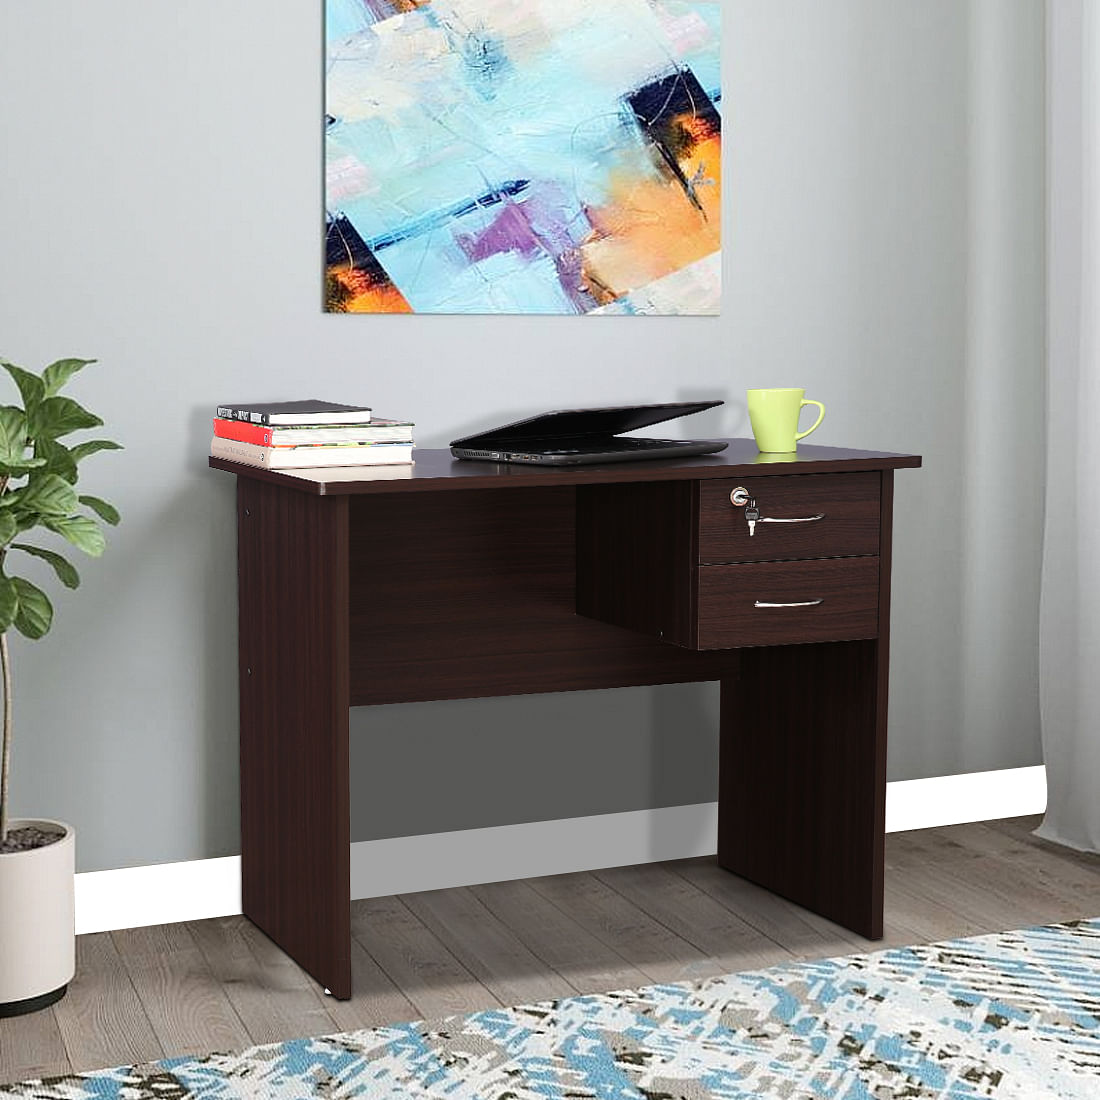 Buy Simply Study Table in Walnut Colour Online at Best Price-HomeTown